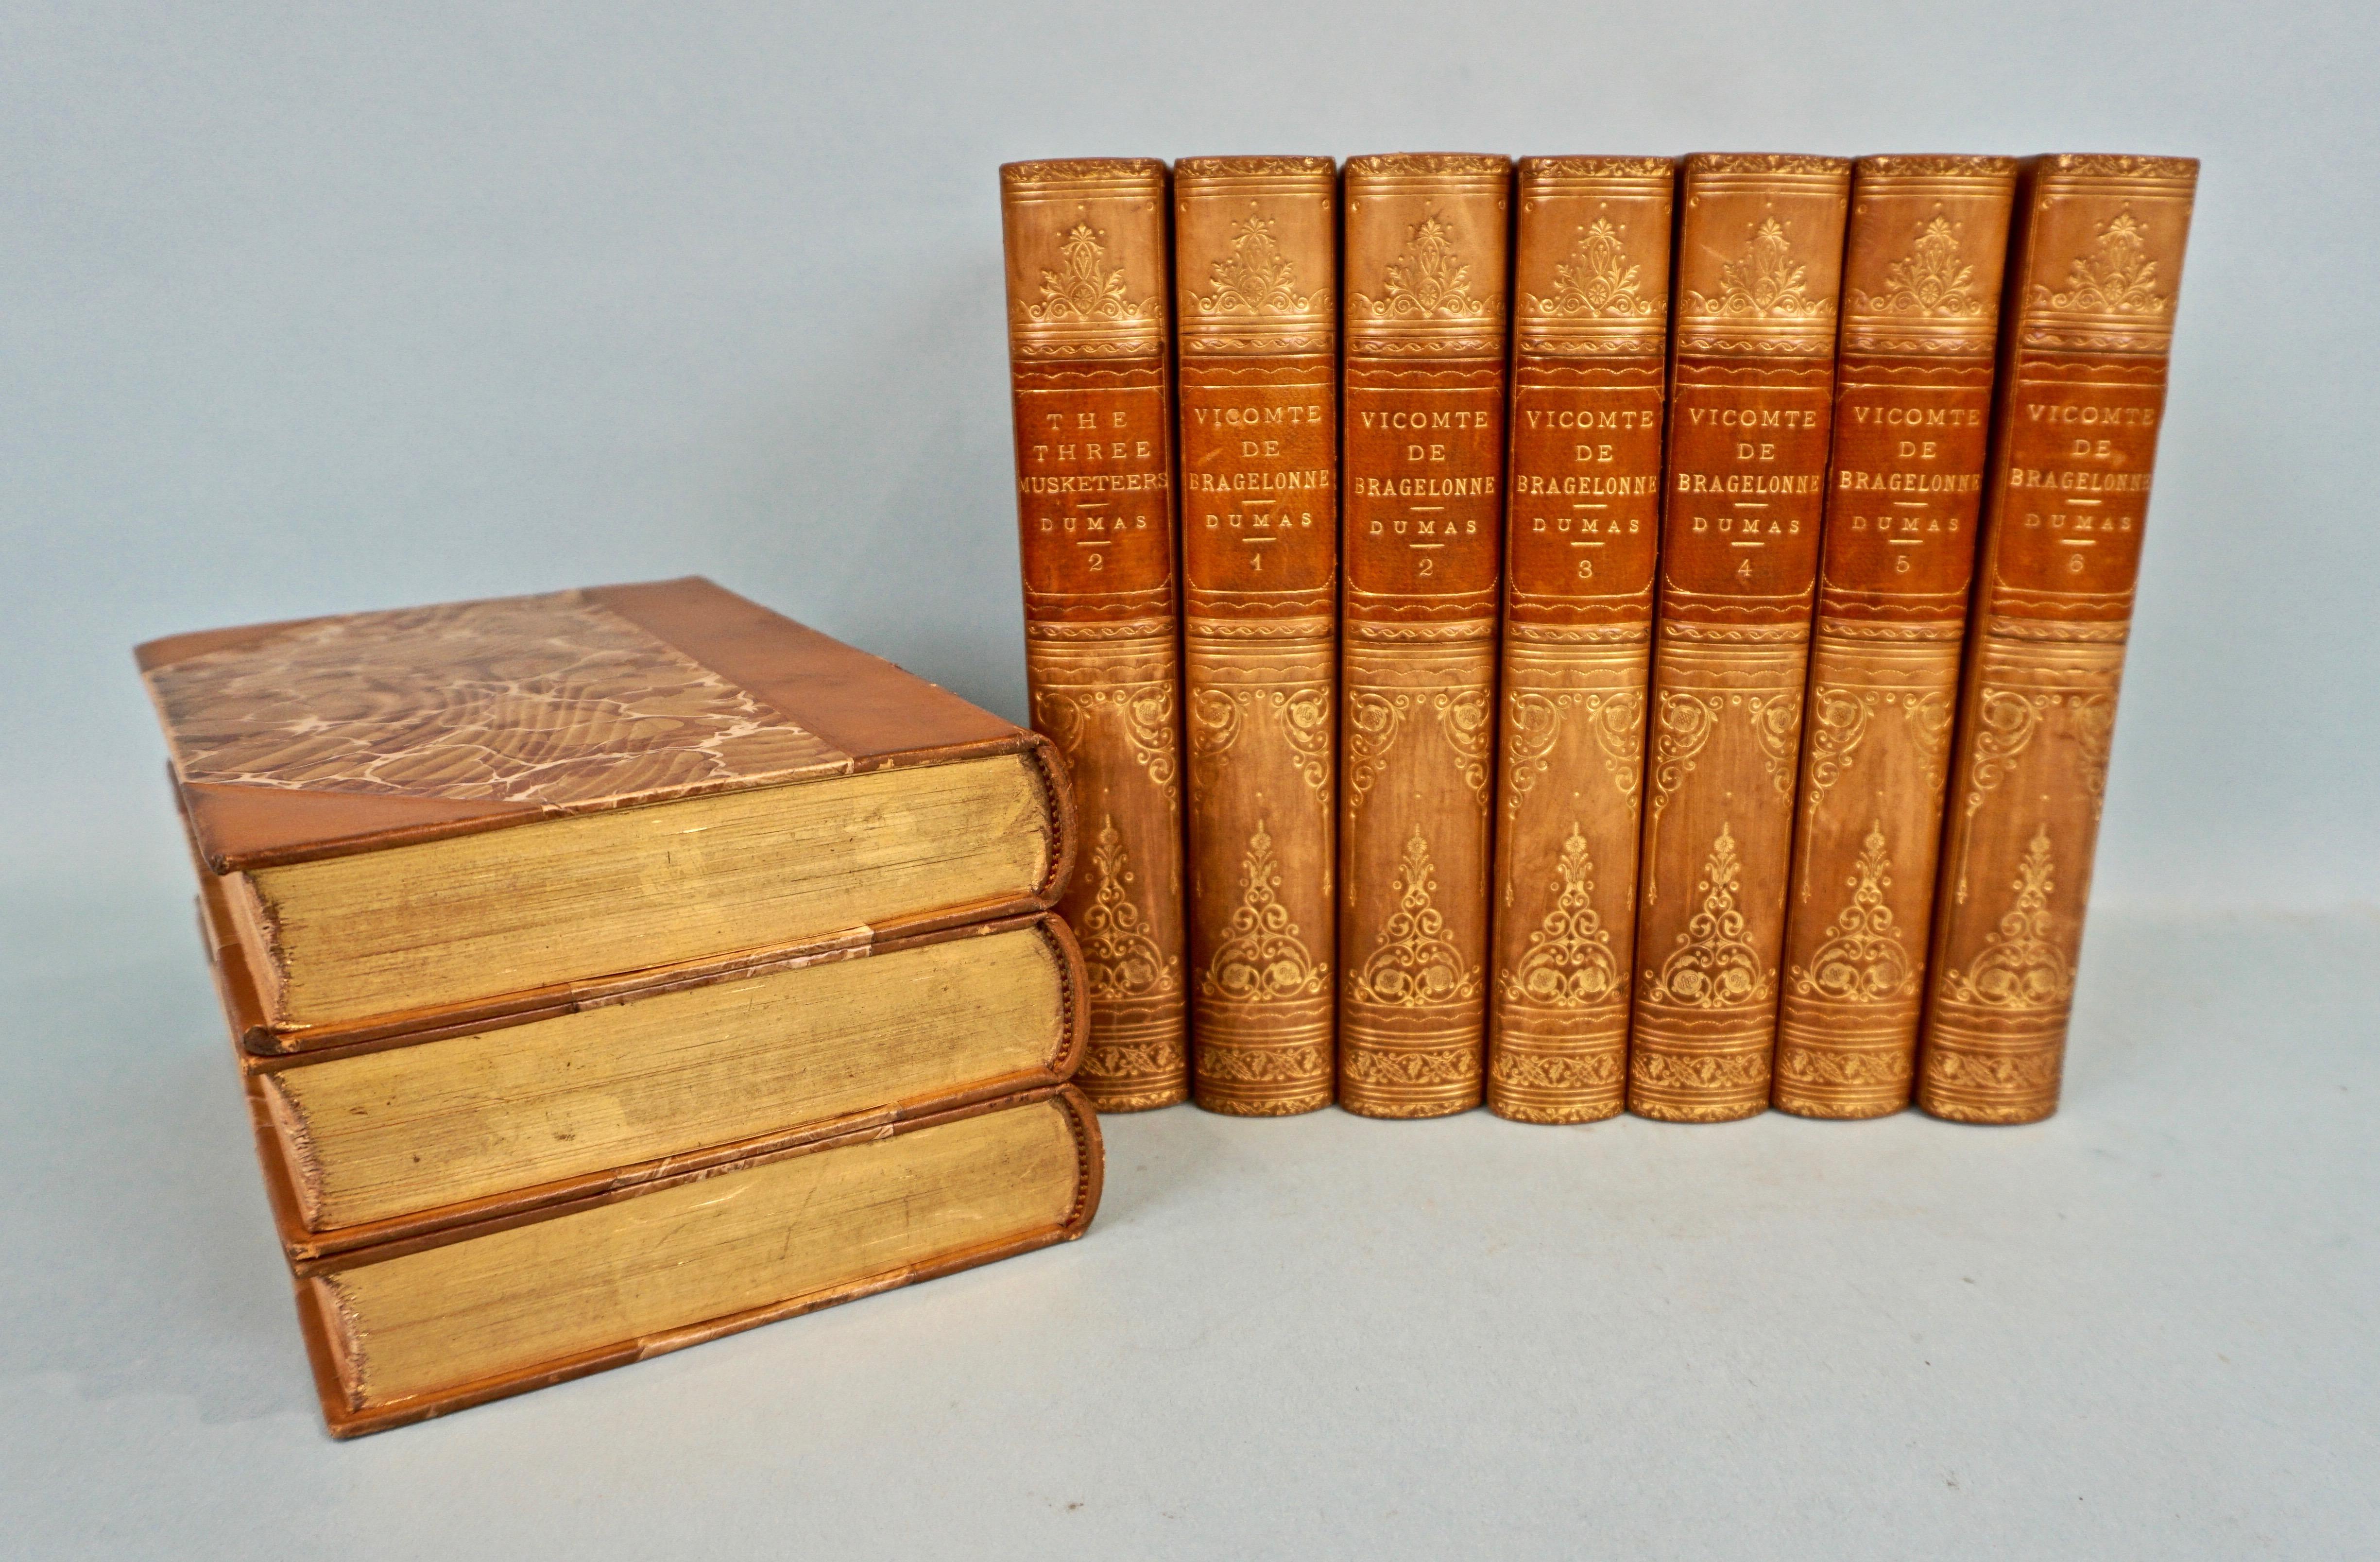 American Works of Dumas in 10 Volumes Published Boston Little Brown, and Company 1889